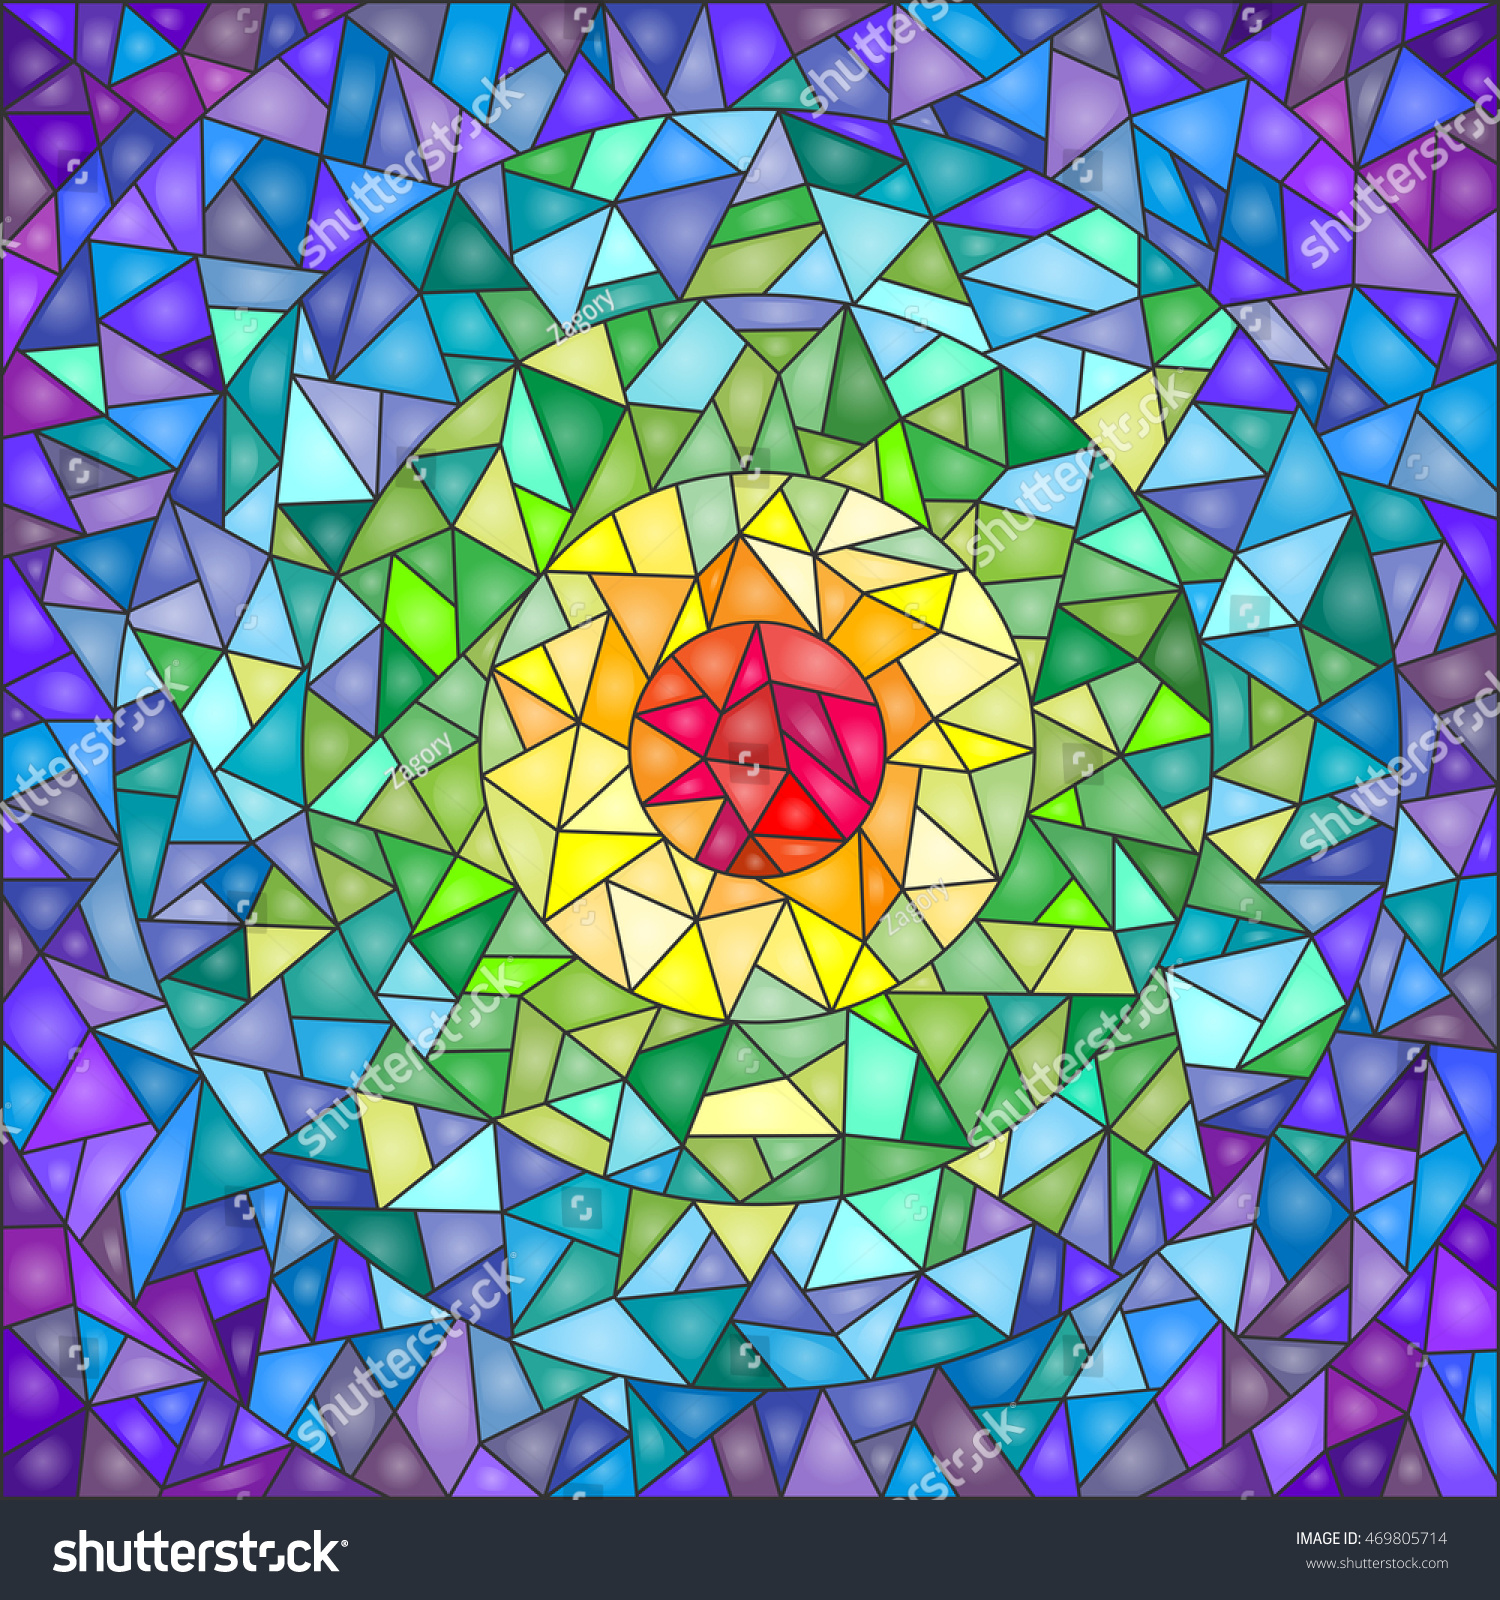 stock-vector-abstract-stained-glass-background-the-colored-elements-arranged-in-rainbow-spectrum-469805714.jpg